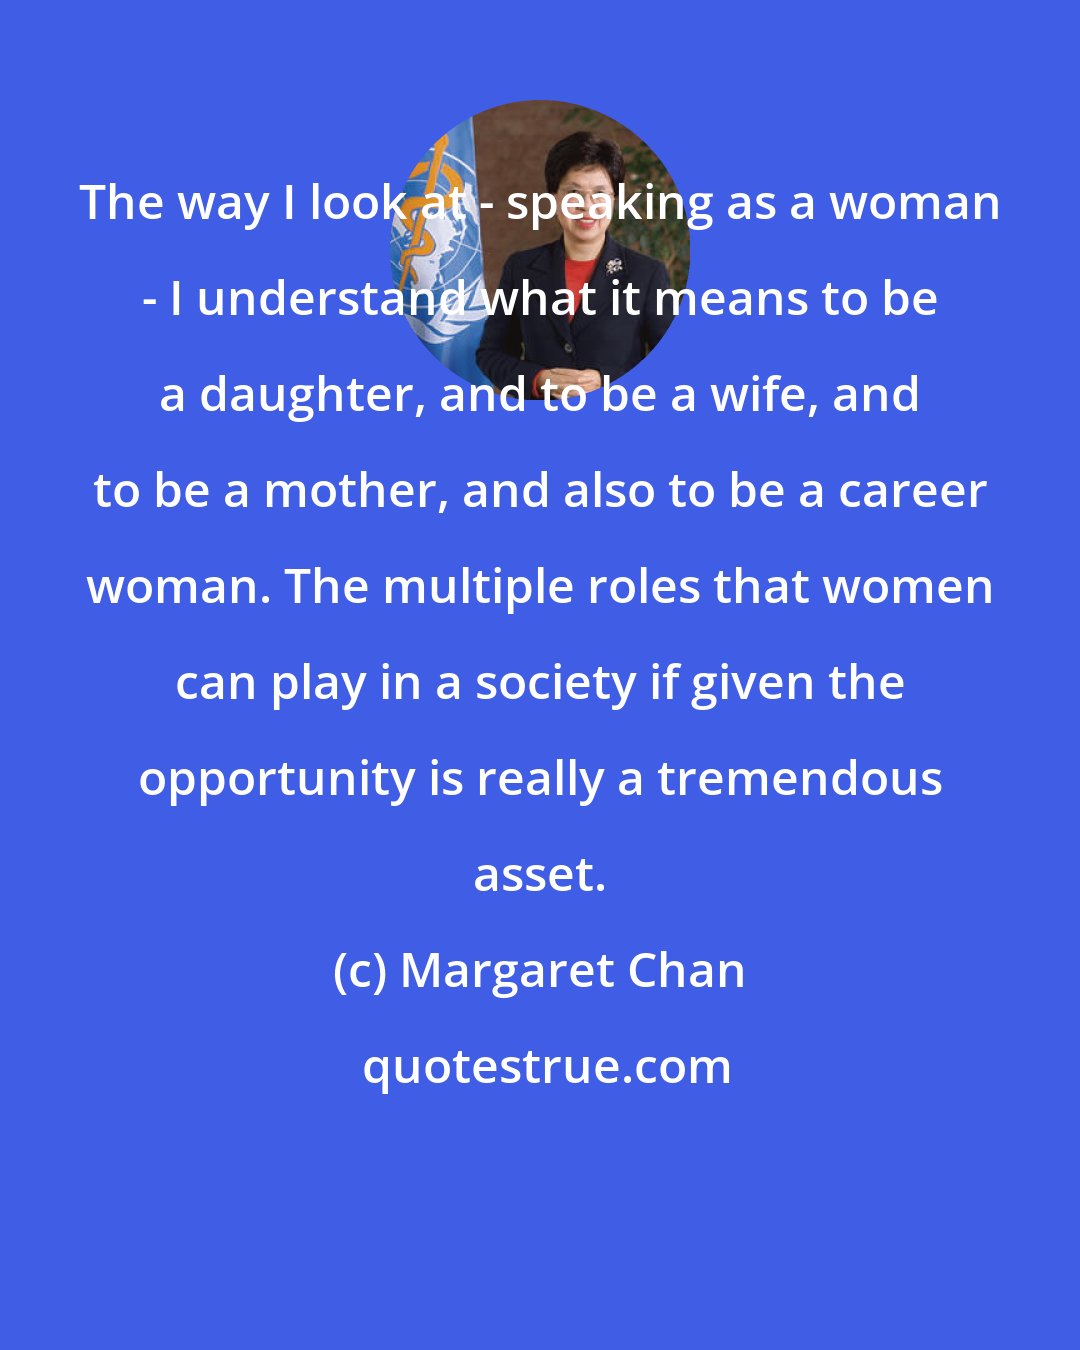 Margaret Chan: The way I look at - speaking as a woman - I understand what it means to be a daughter, and to be a wife, and to be a mother, and also to be a career woman. The multiple roles that women can play in a society if given the opportunity is really a tremendous asset.